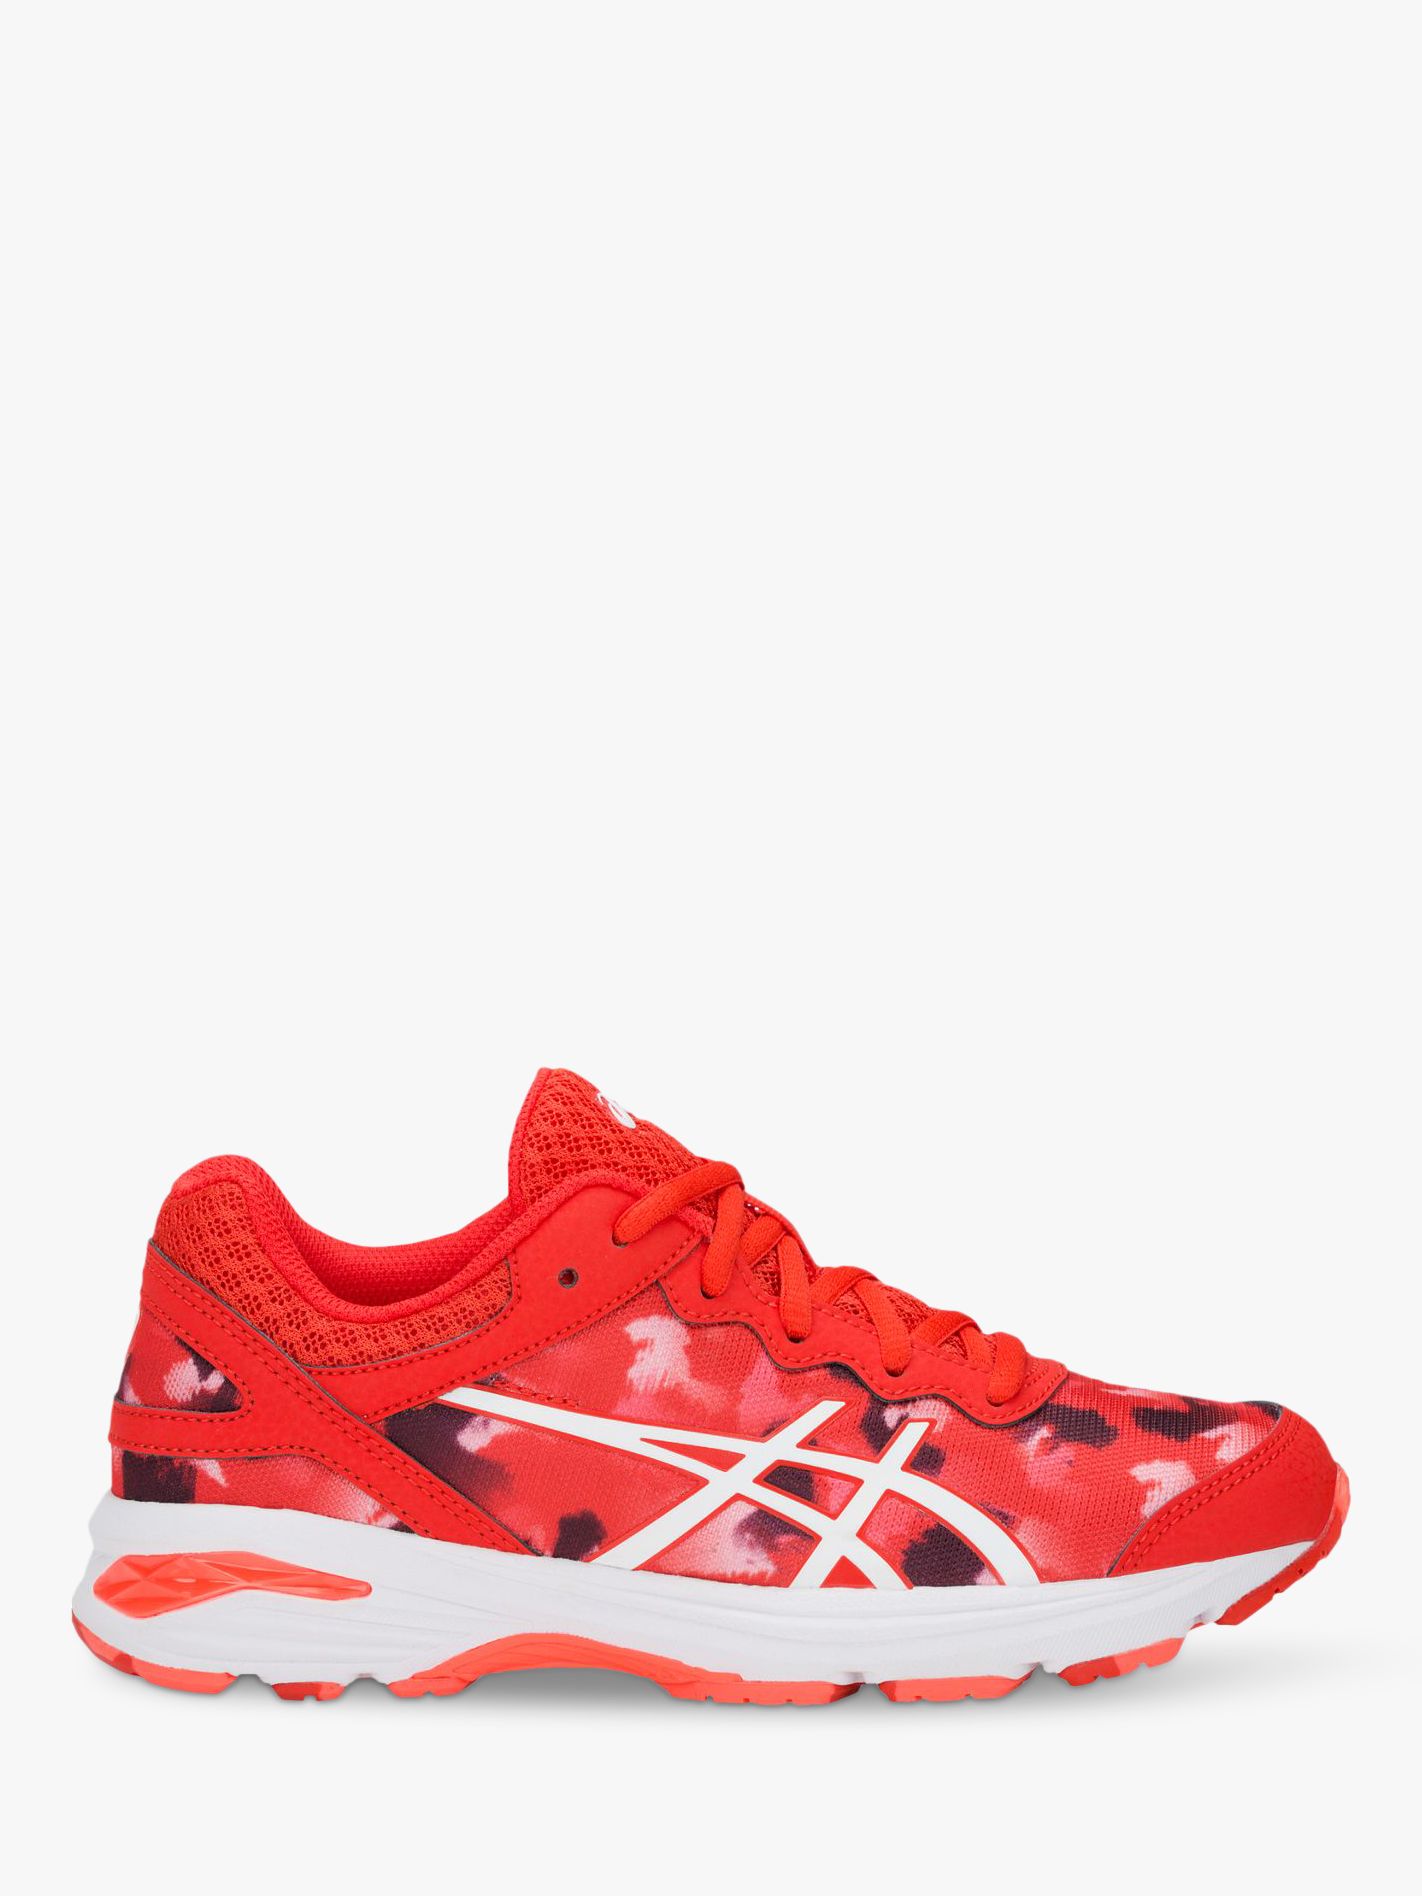 red netball shoes